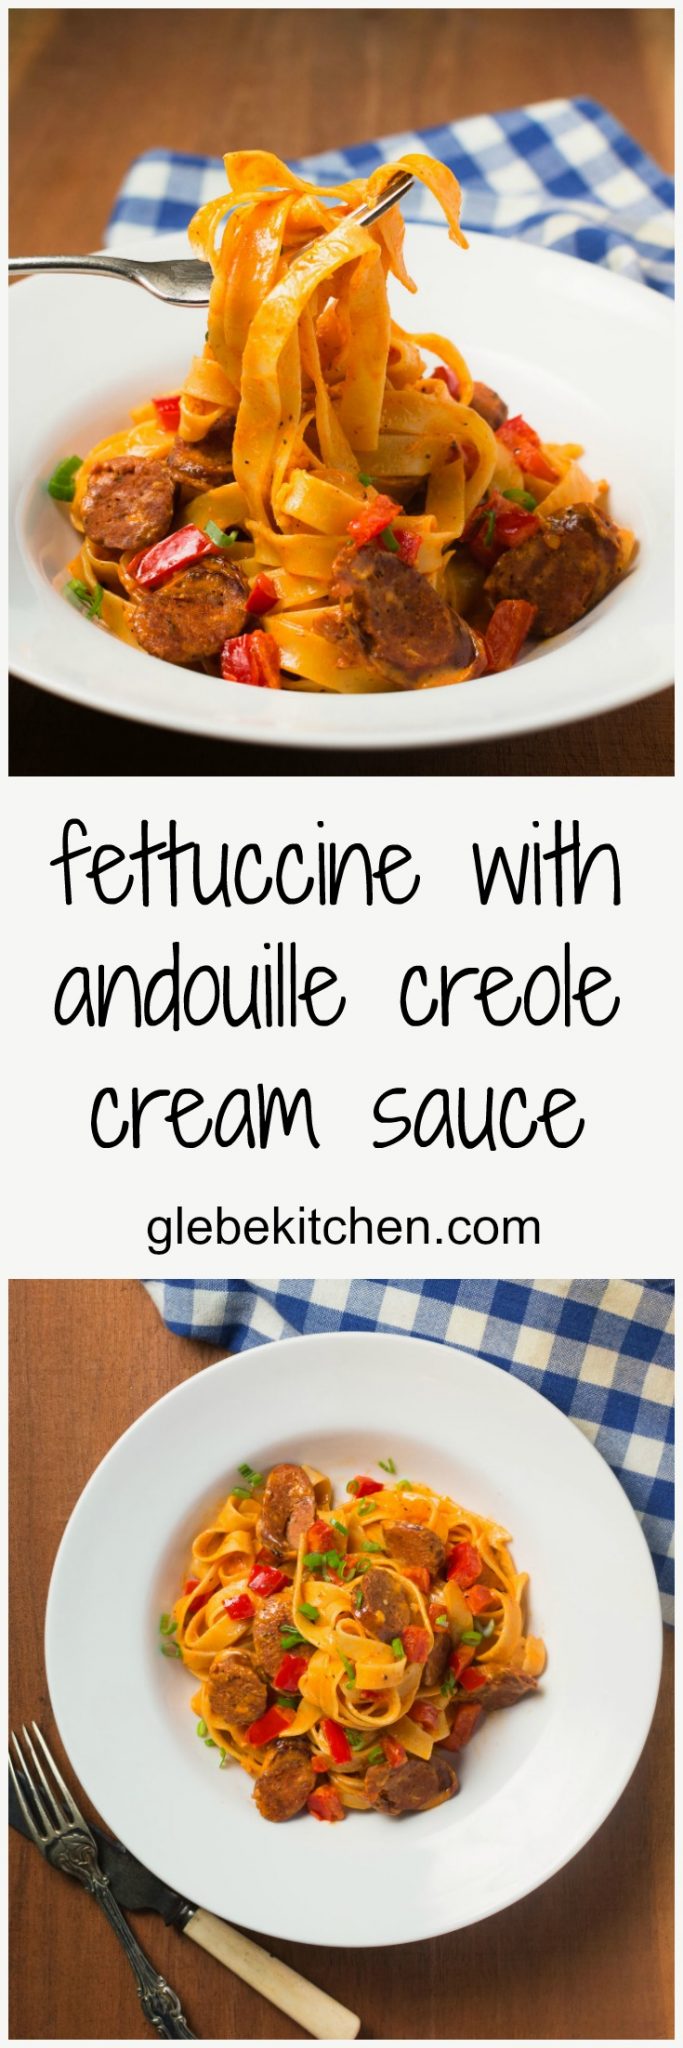 Fettuccine with andouille creole cream sauce. Ready in 20 minutes.